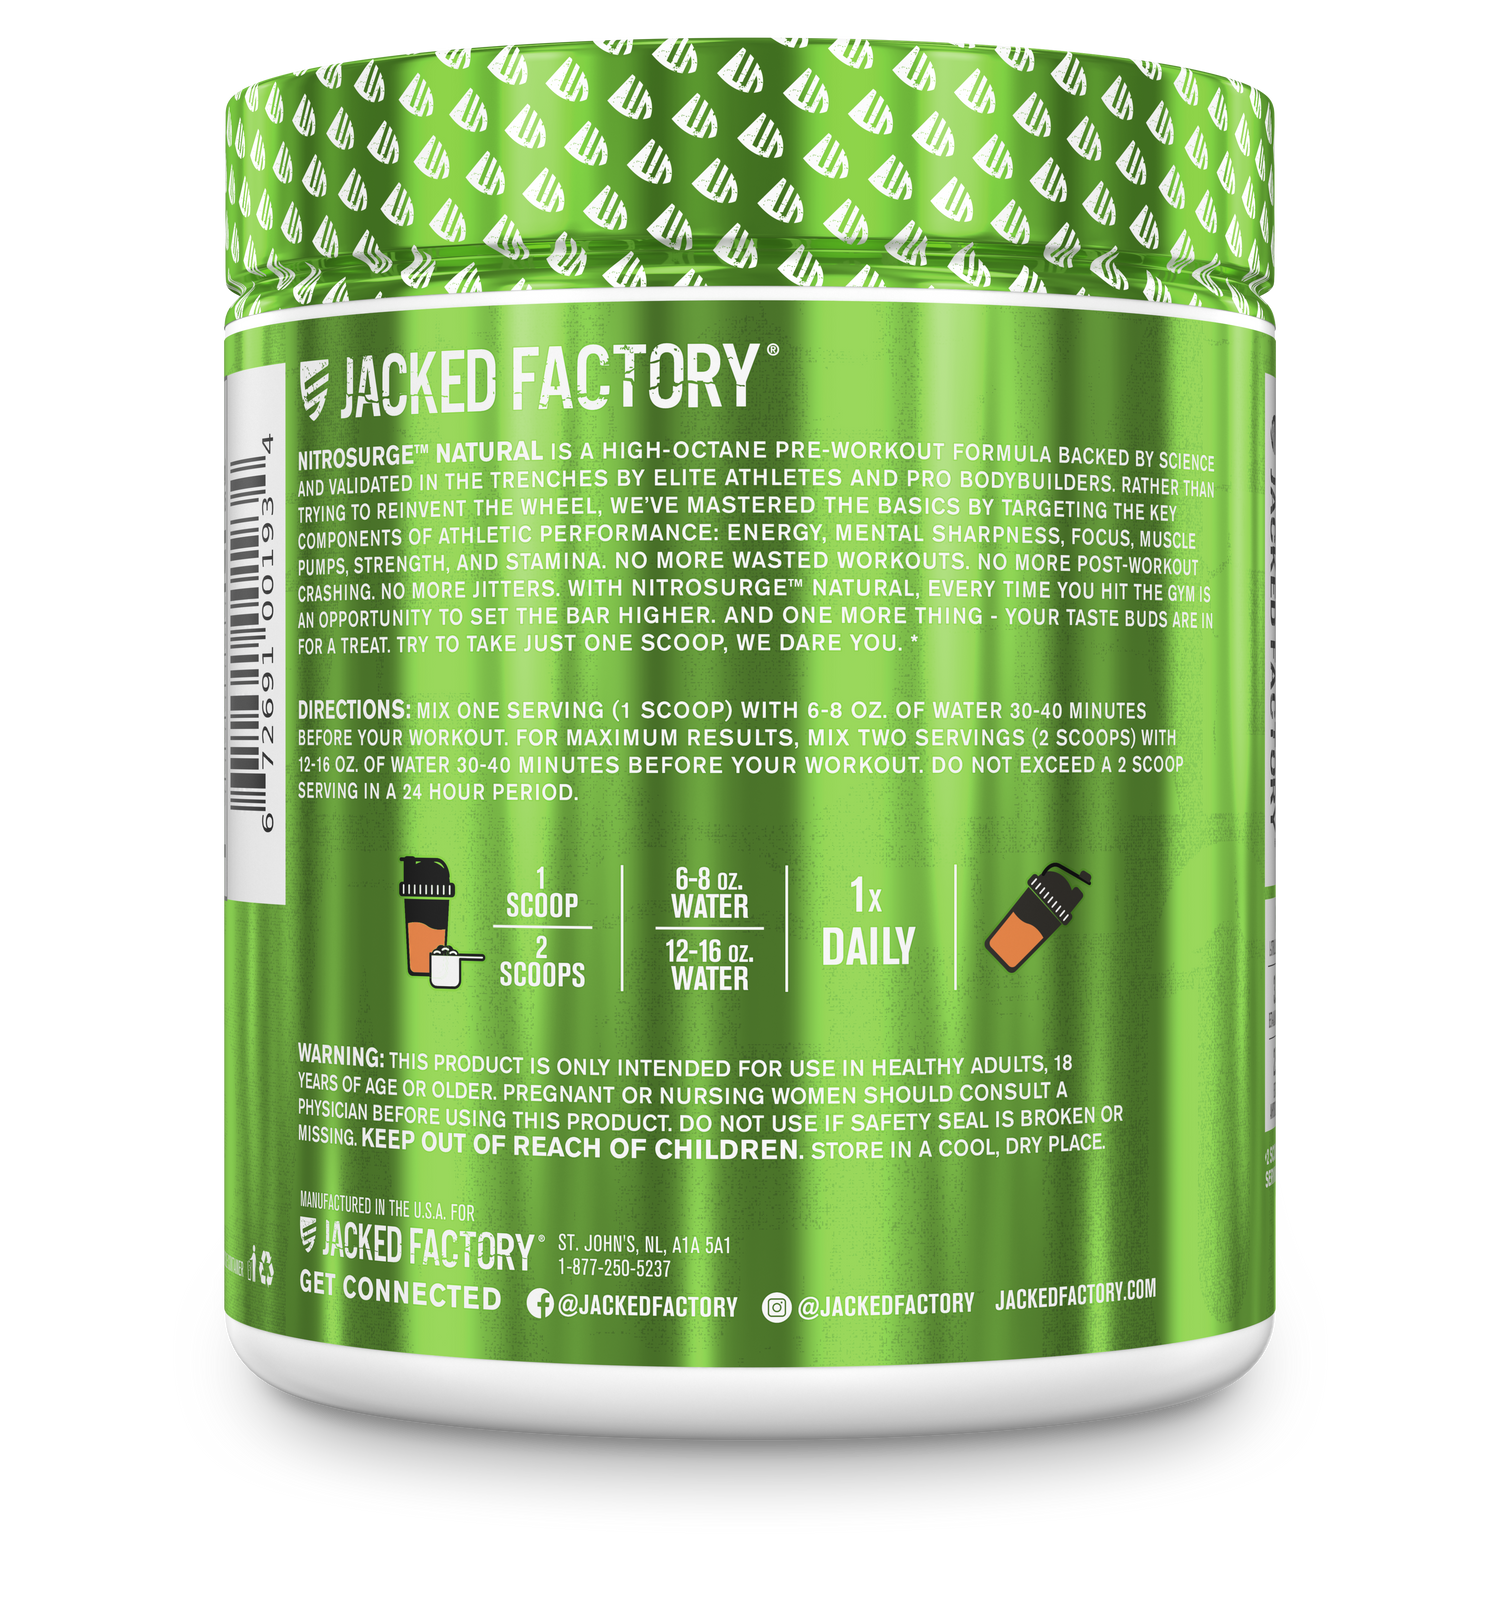 Jacked Factory Nitro Surge Natural recommended usage